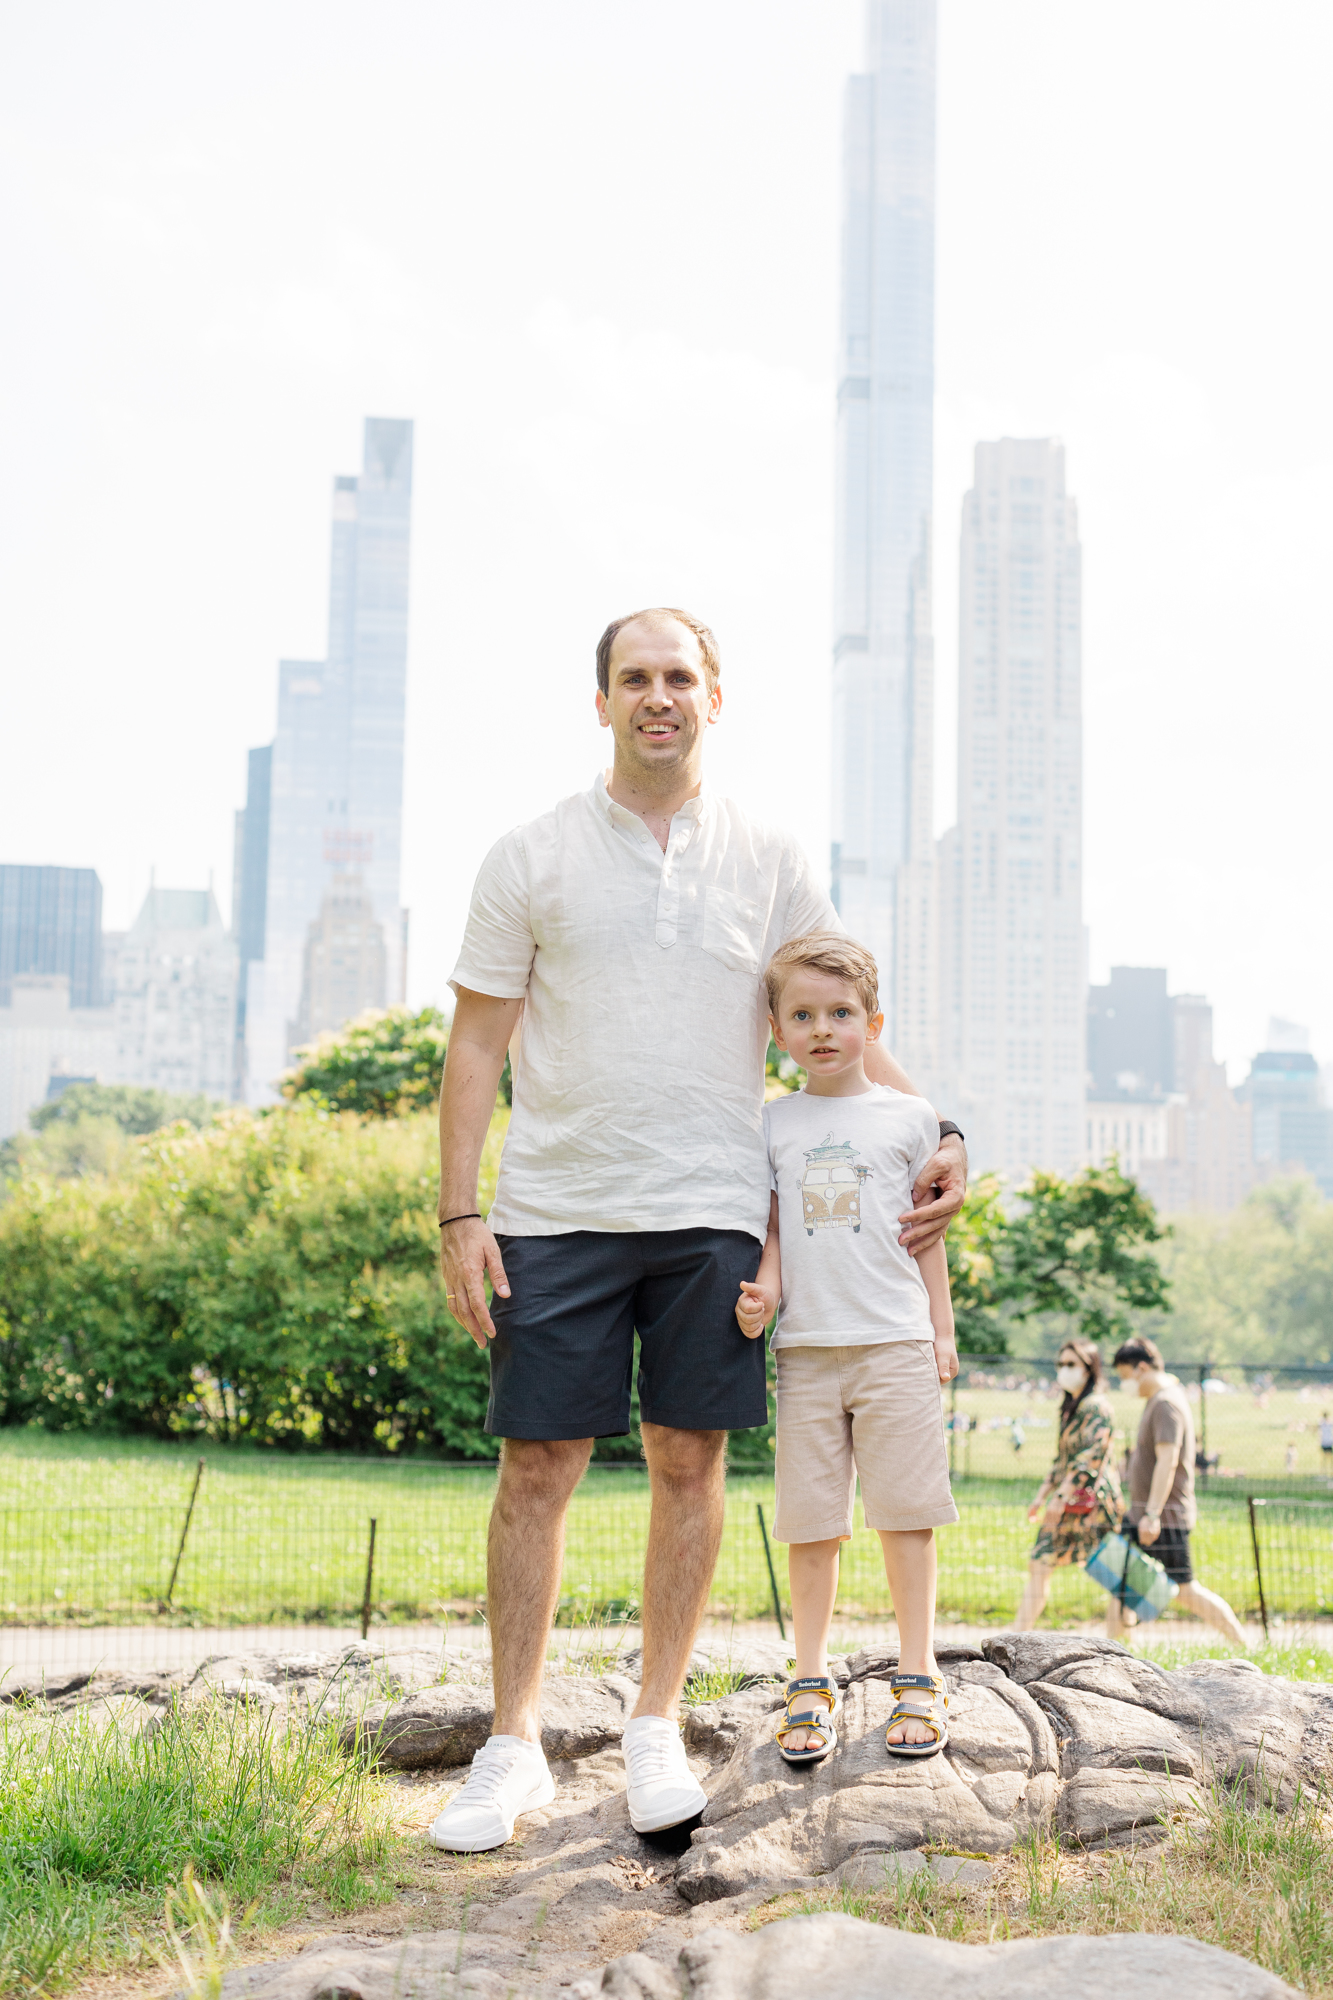 Whimsical Family Photos in Central Park